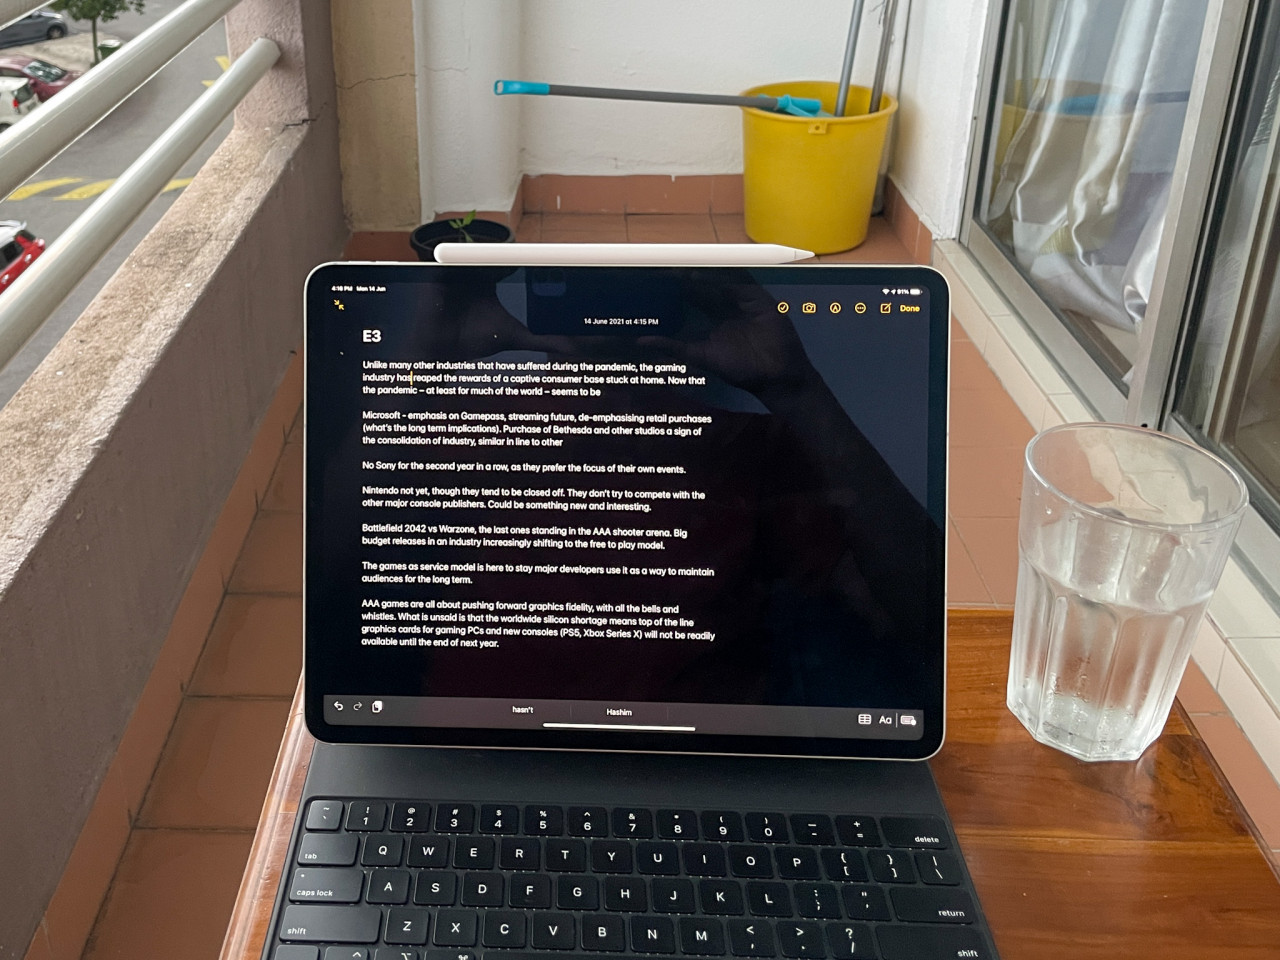 The iPad Pro in a more casual work setting. – Pic by Haikal Fernandez